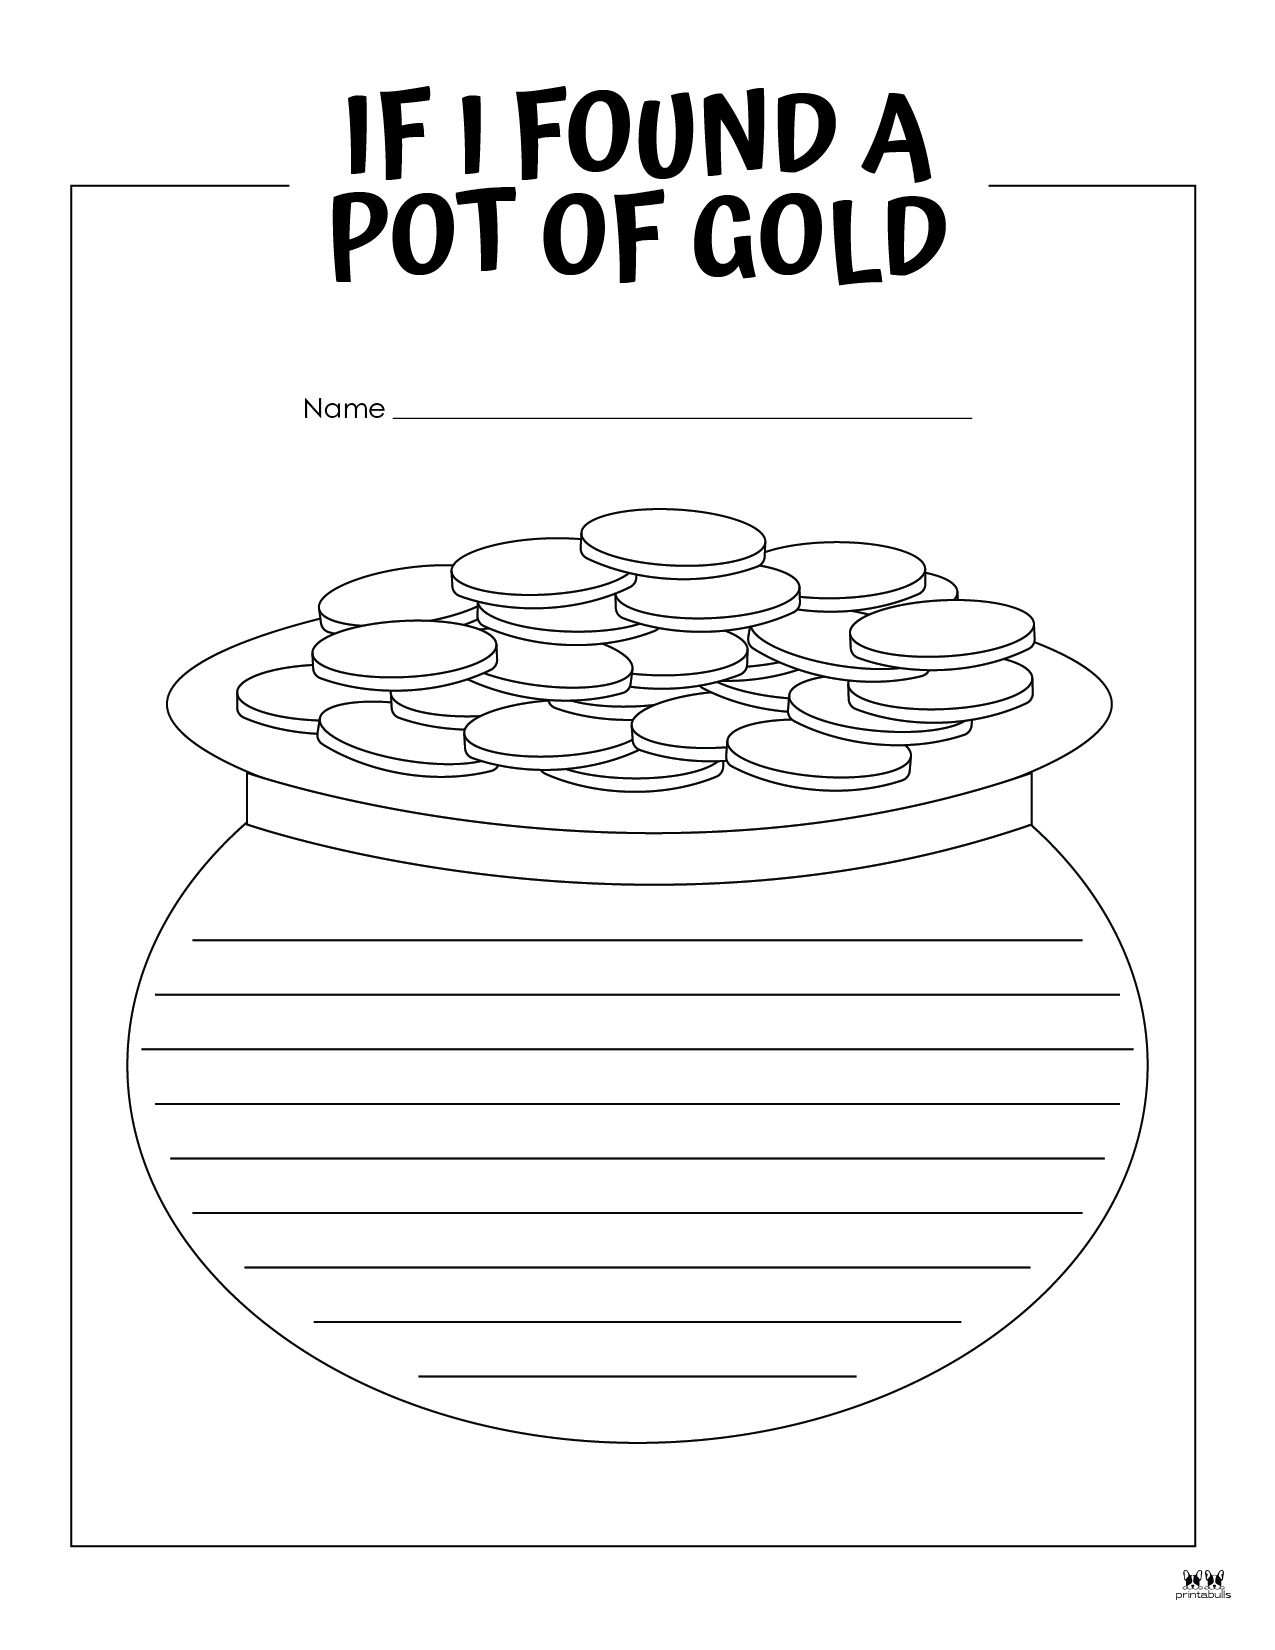 pot-of-gold-templates-coloring-pages-33-pages-printabulls